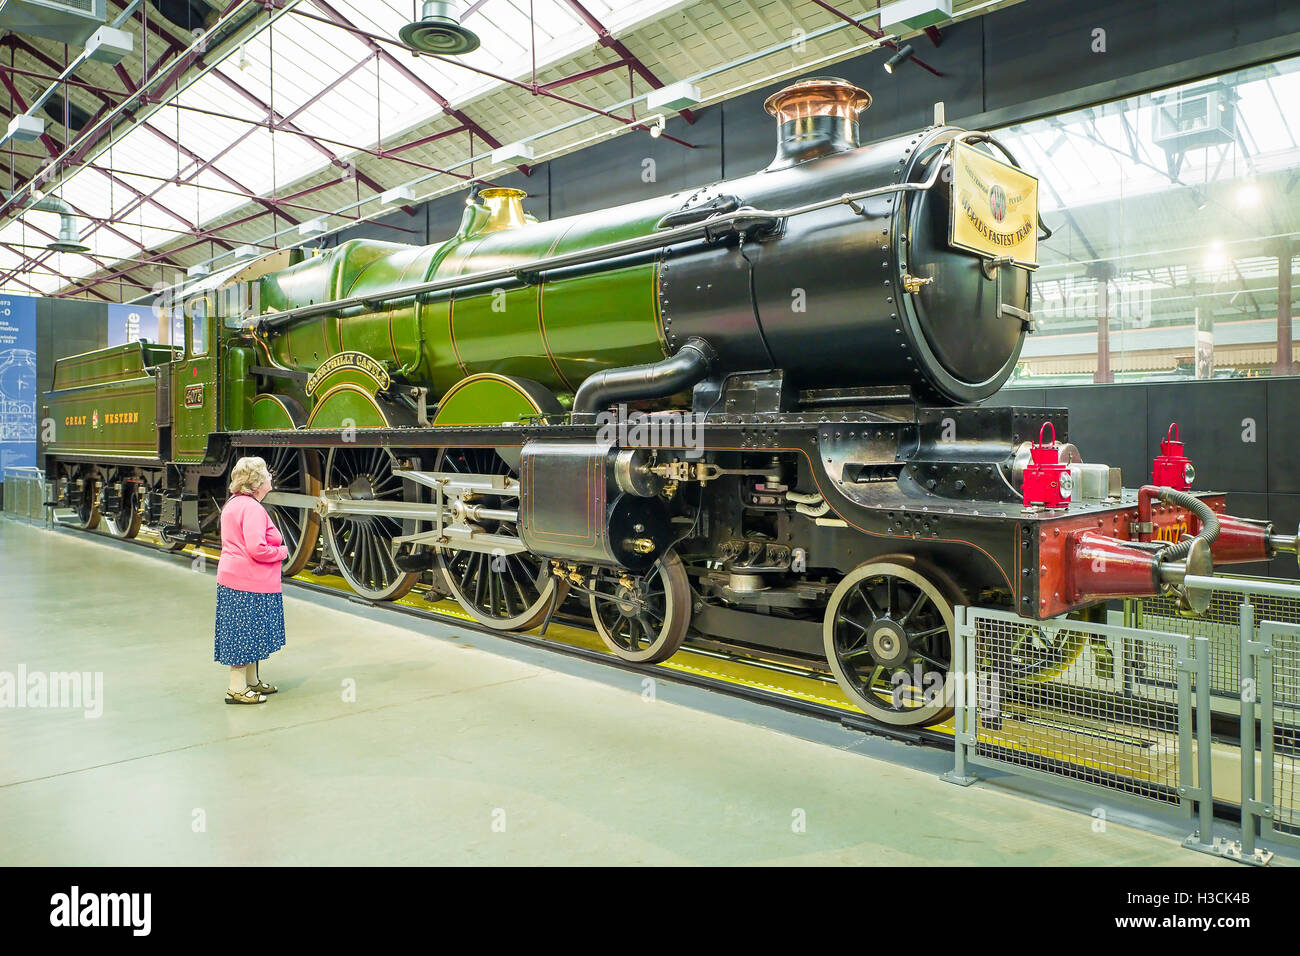 A lady dwarfed by a preserved steam locomotive built in the 1920s and exhibited in the GWR steam museum in Swindon UK Stock Photo